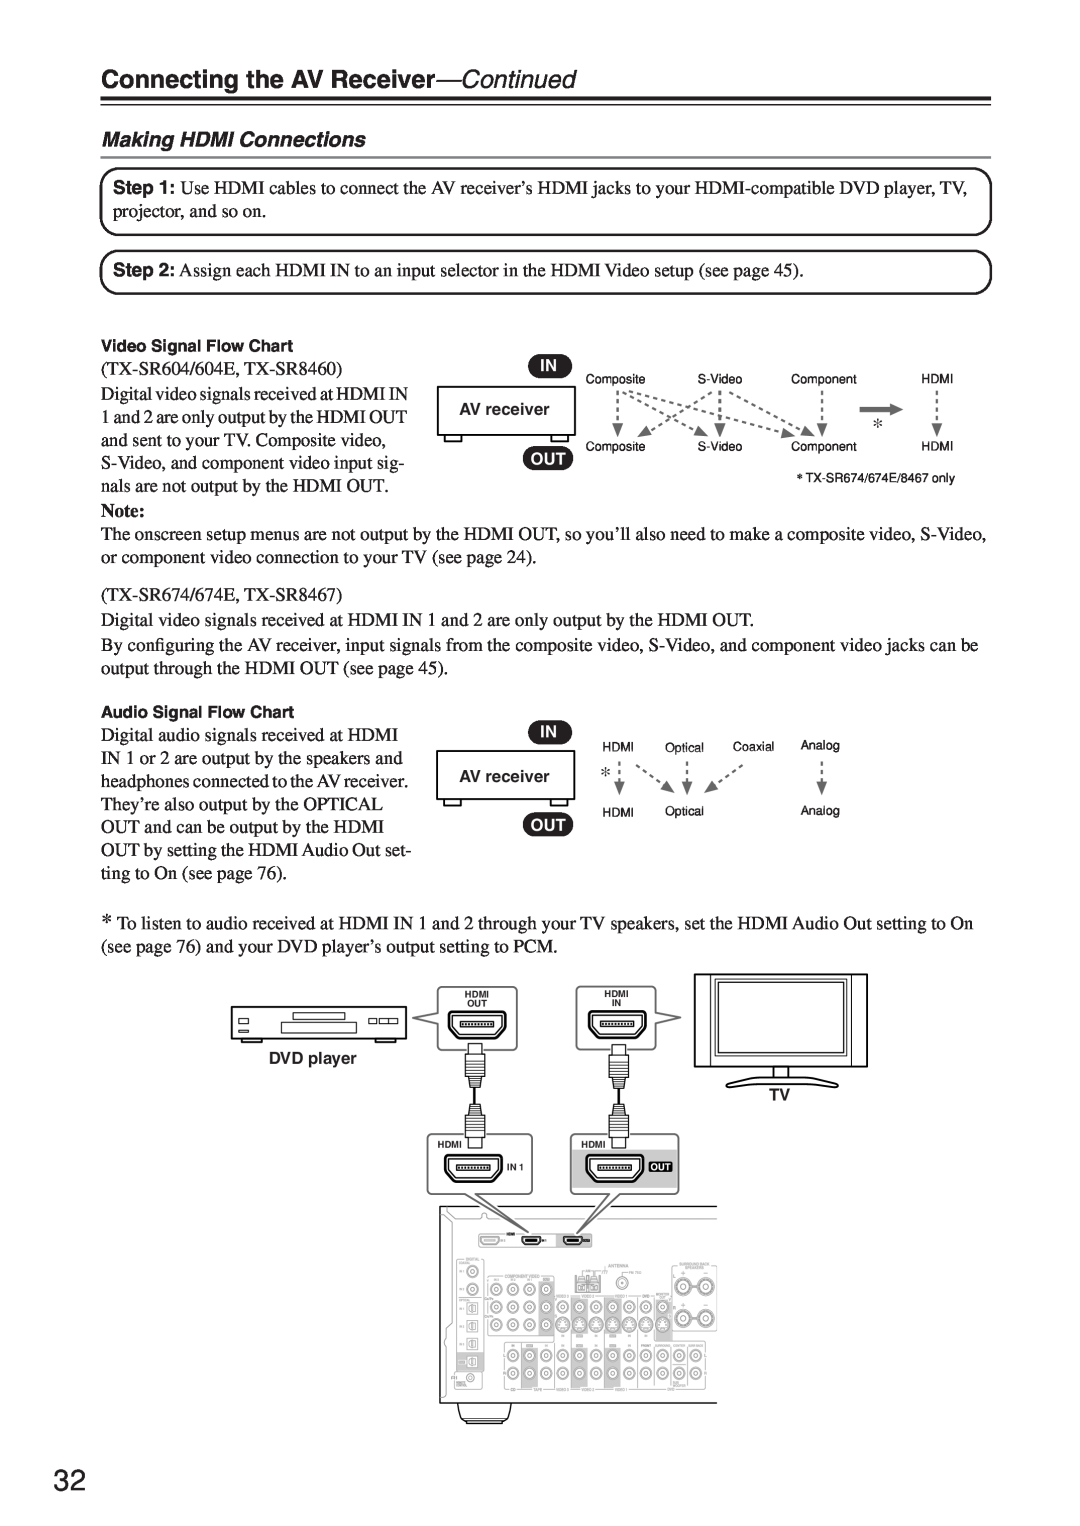 Onkyo TX-SR604/604E, TX-SR674/674E instruction manual Making HDMI Connections, Connecting the AV Receiver—Continued 